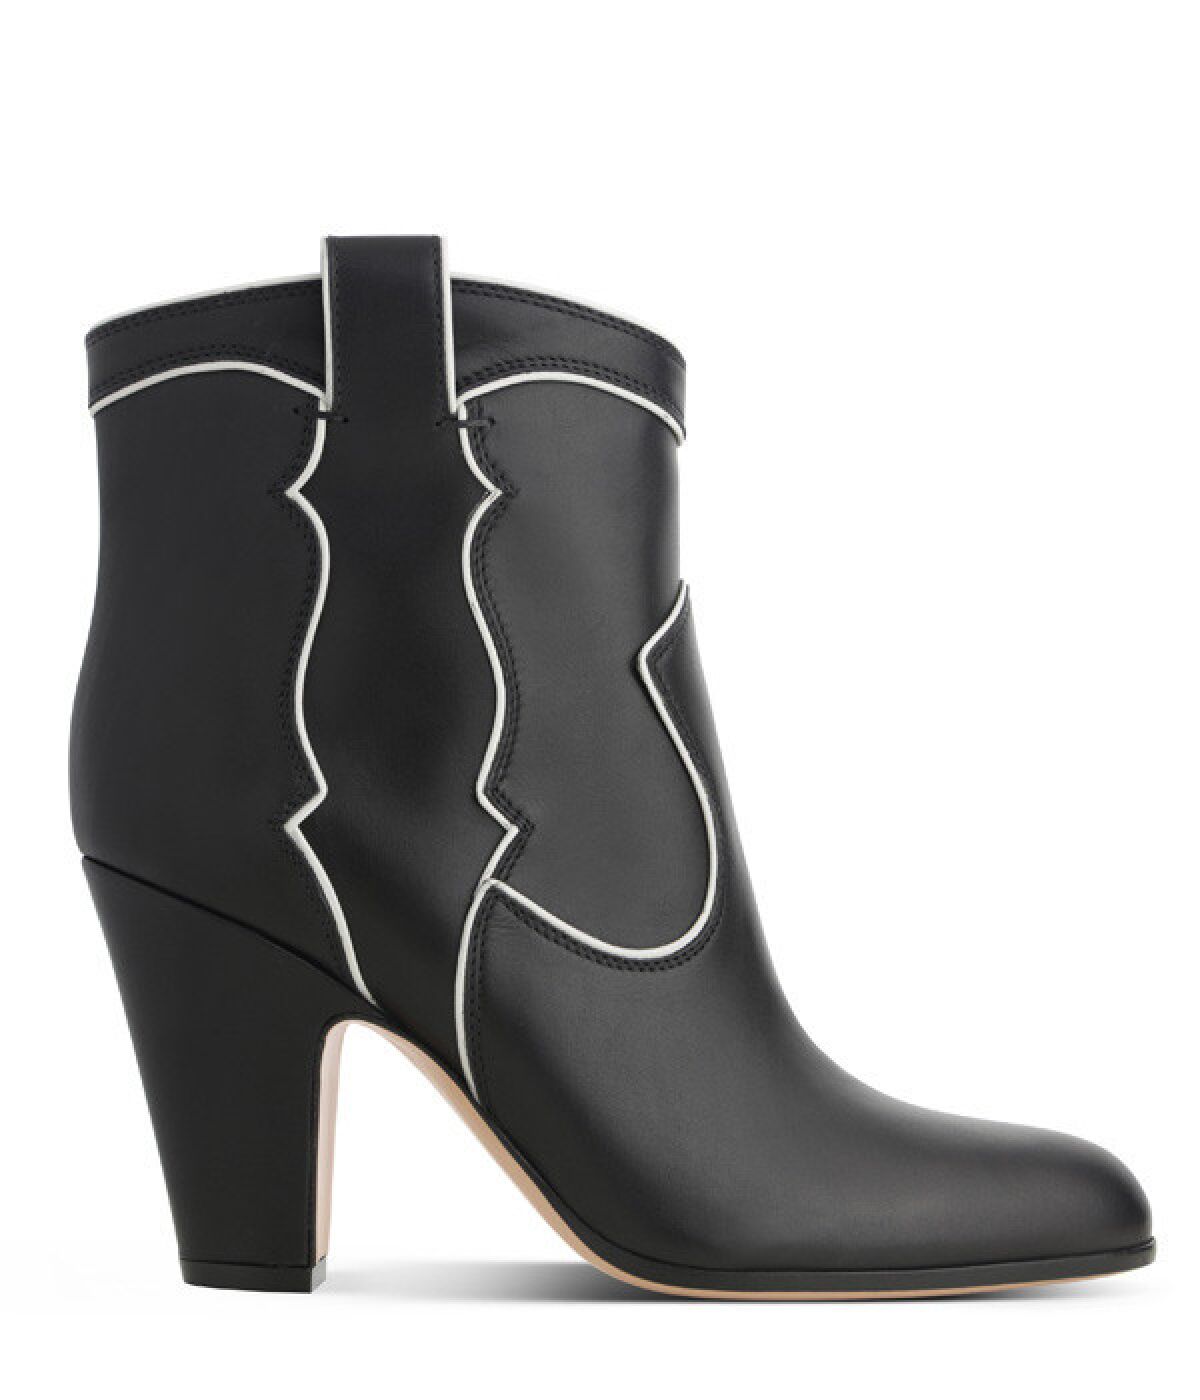 Gianvito Rossi "Pearl" ankle boot.